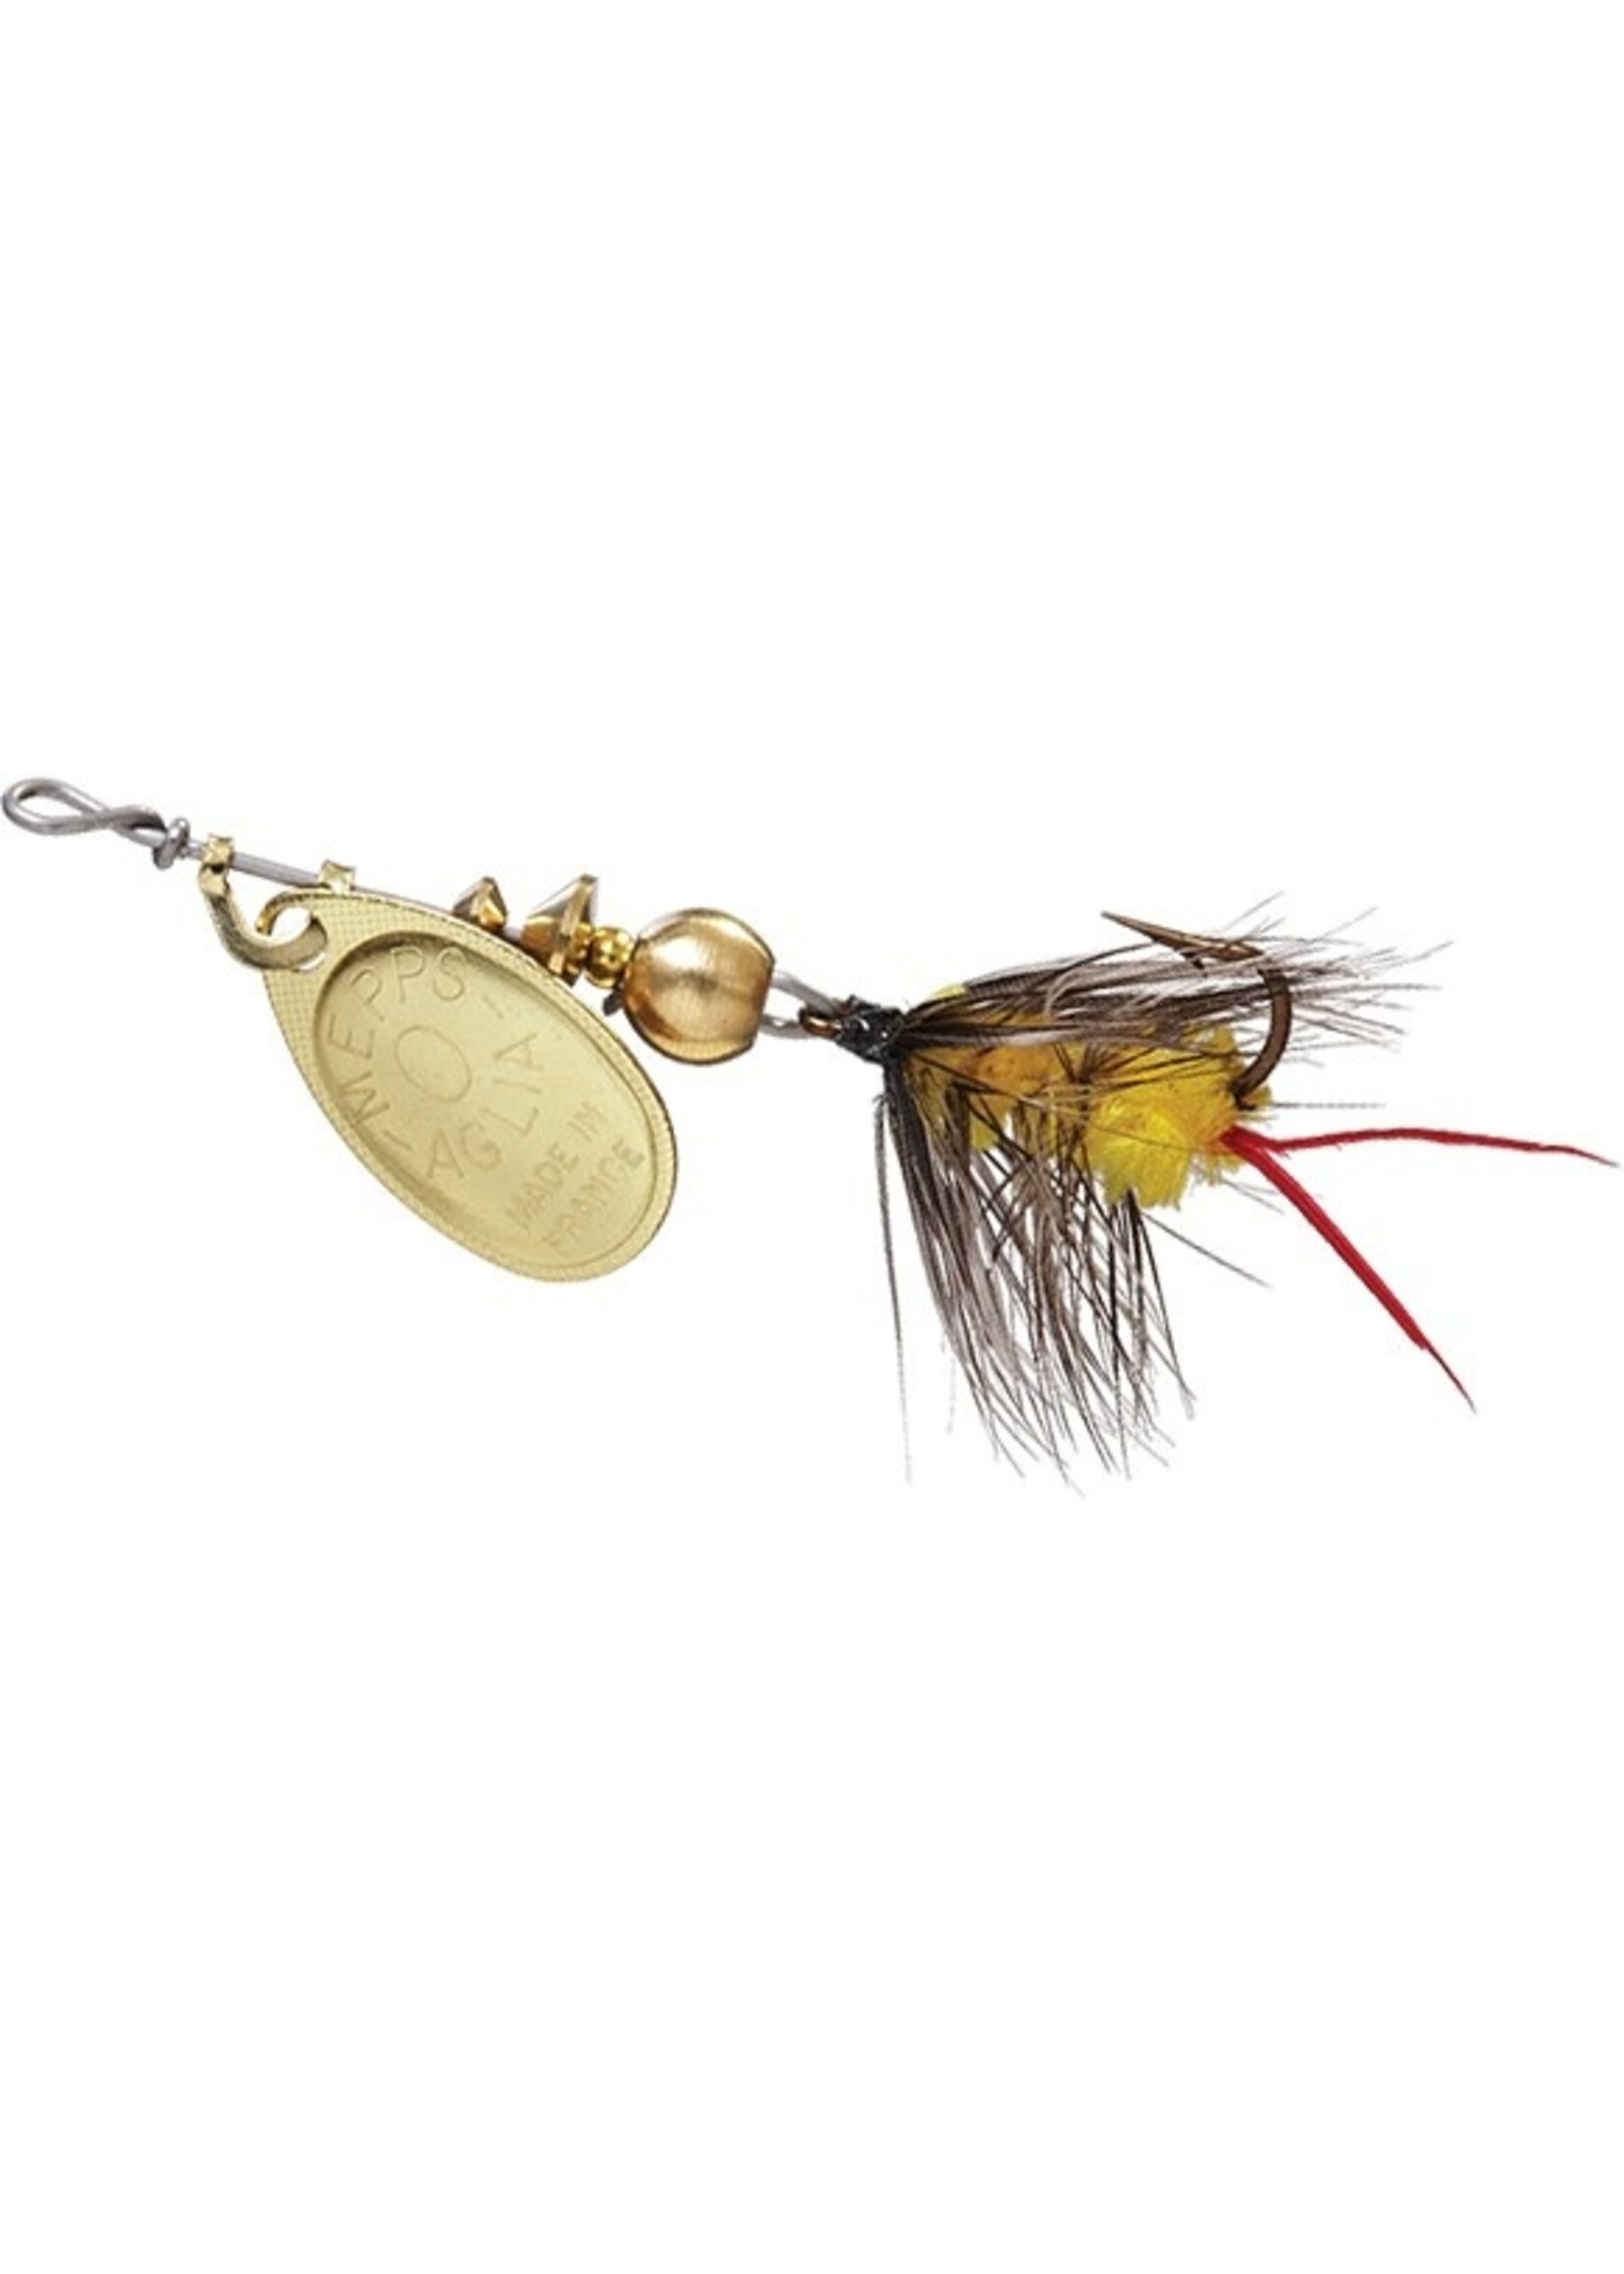 Mepps Wooly Worm Aglia Spin Fly, Gold & Brown, 1/12 oz.